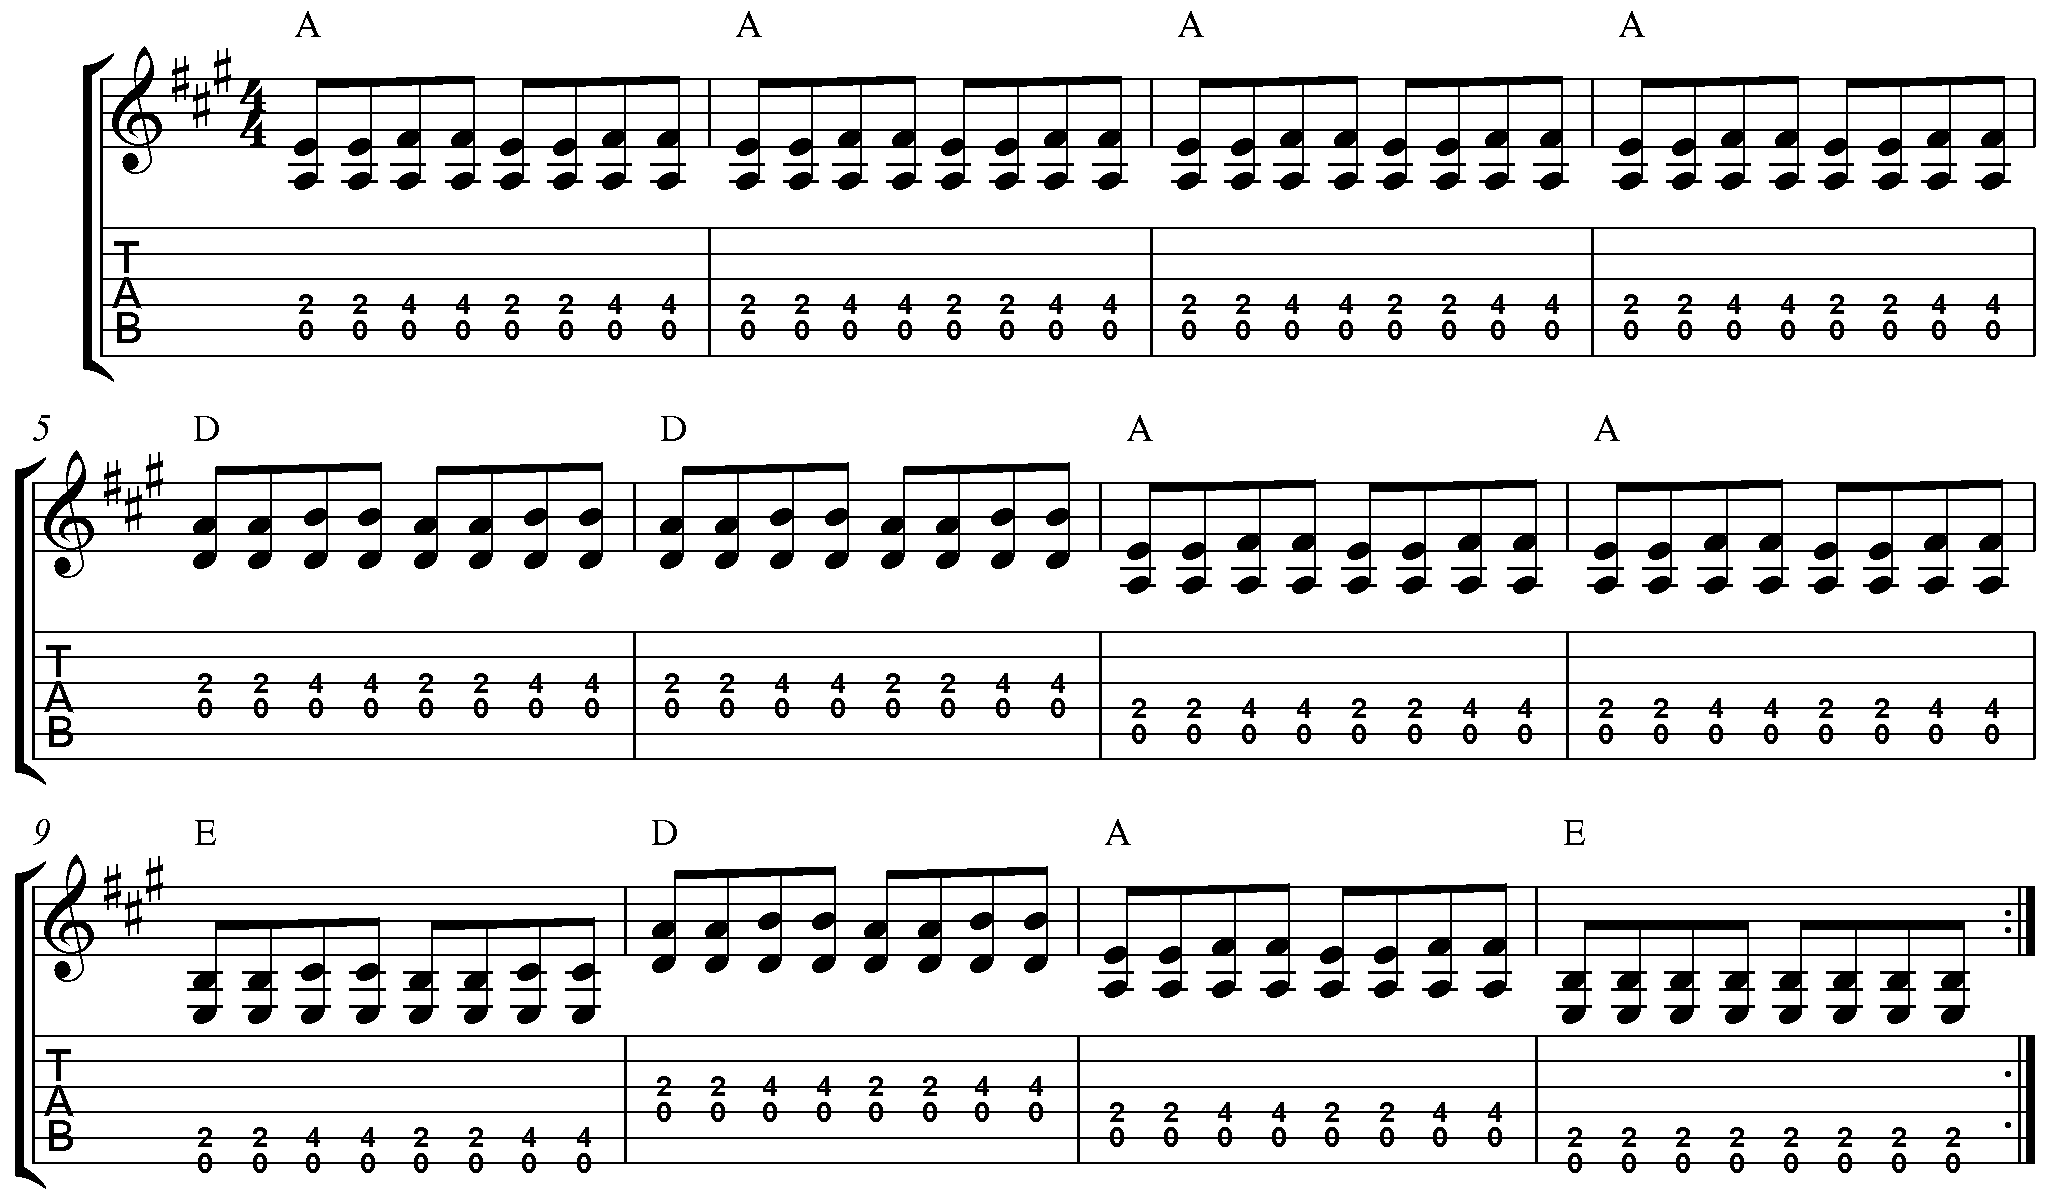 File:12 bar blues in A (using open strings for root notes).png - Wikimedia Commons